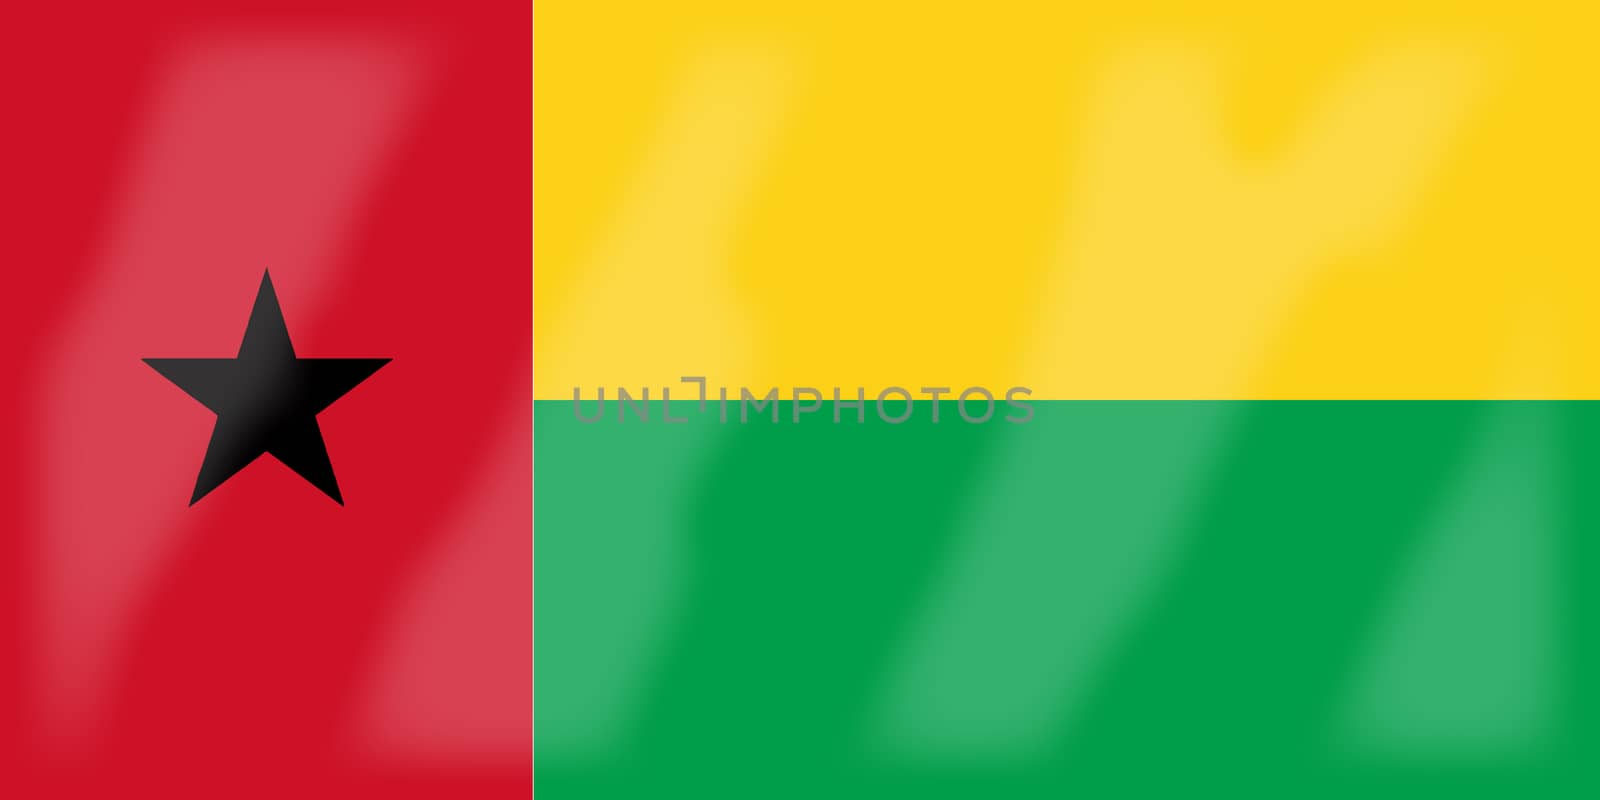 The flag of the African country of Guinea Bissau